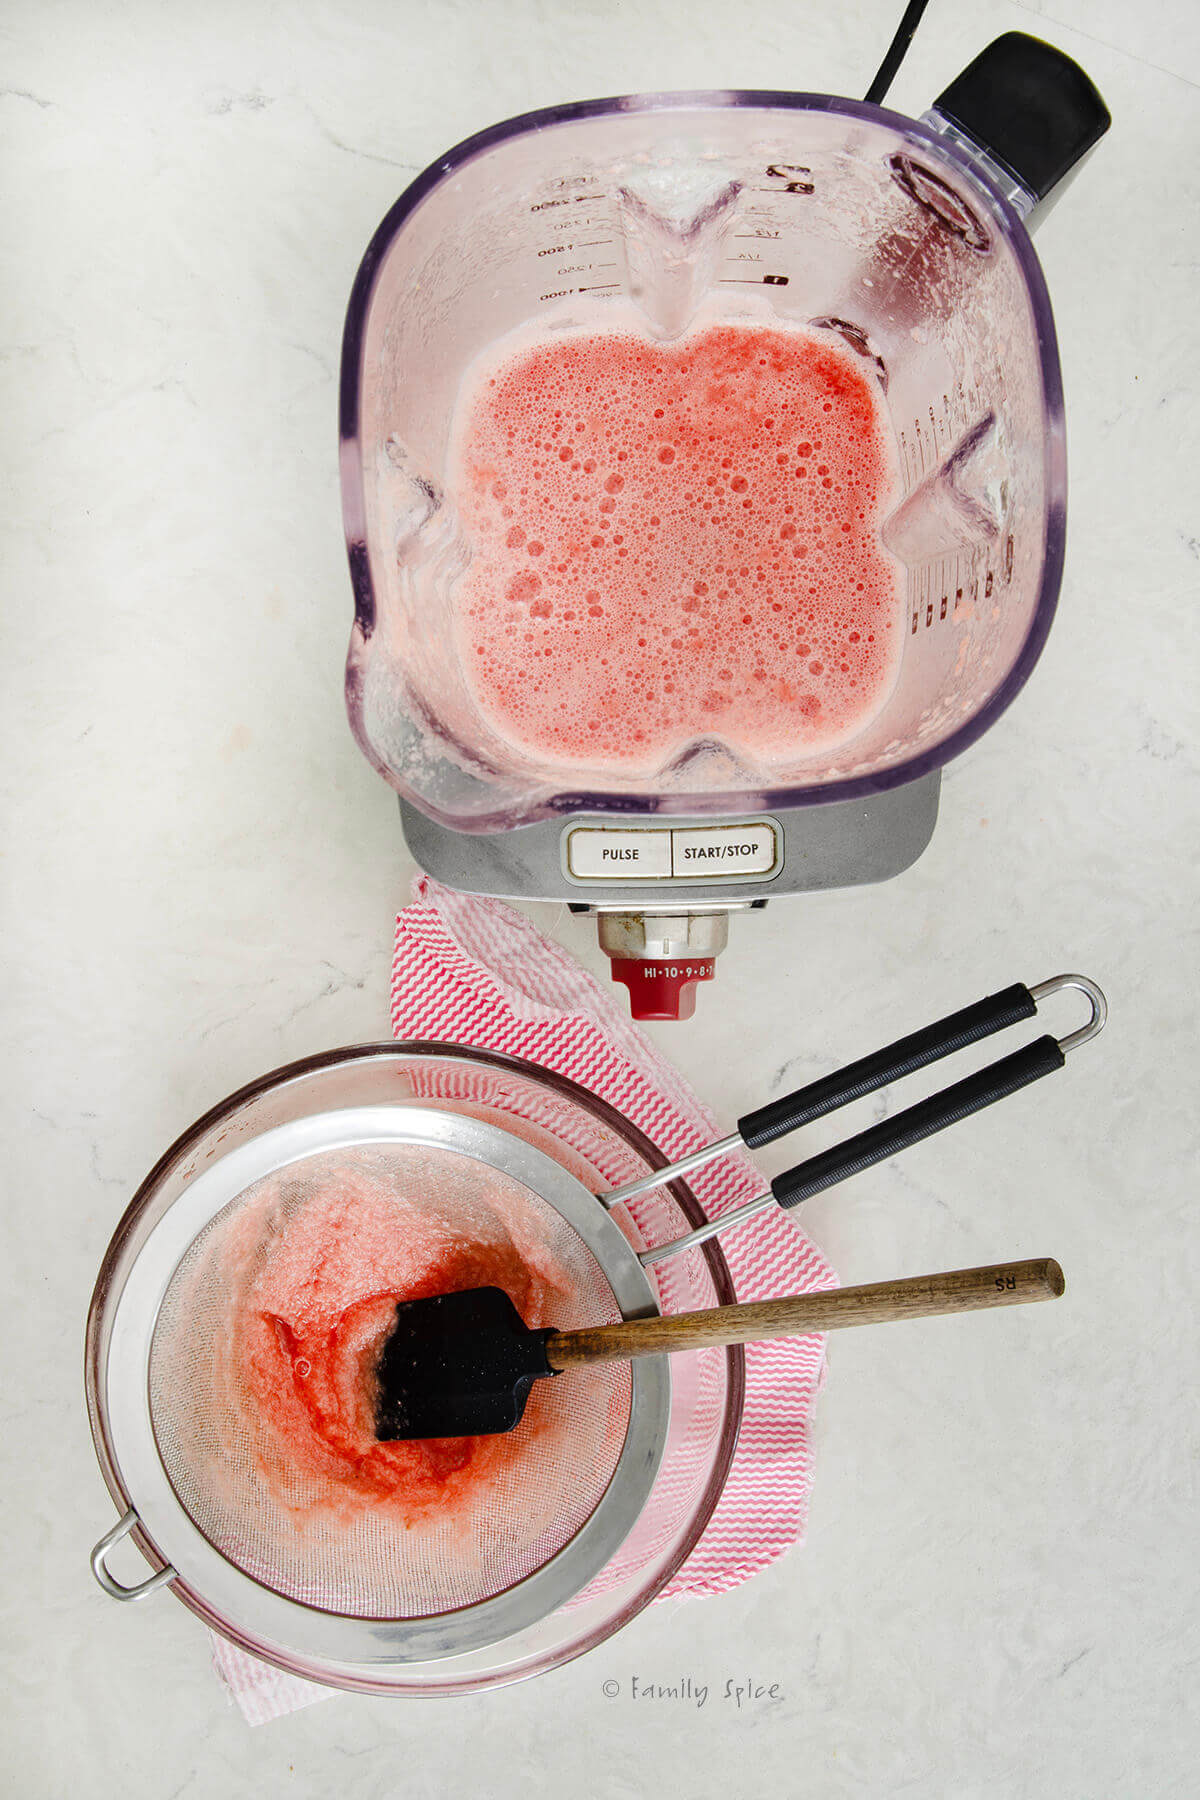 A blender filled with watermelon juice next to a bowl with a strainer on top straining blended watermelon